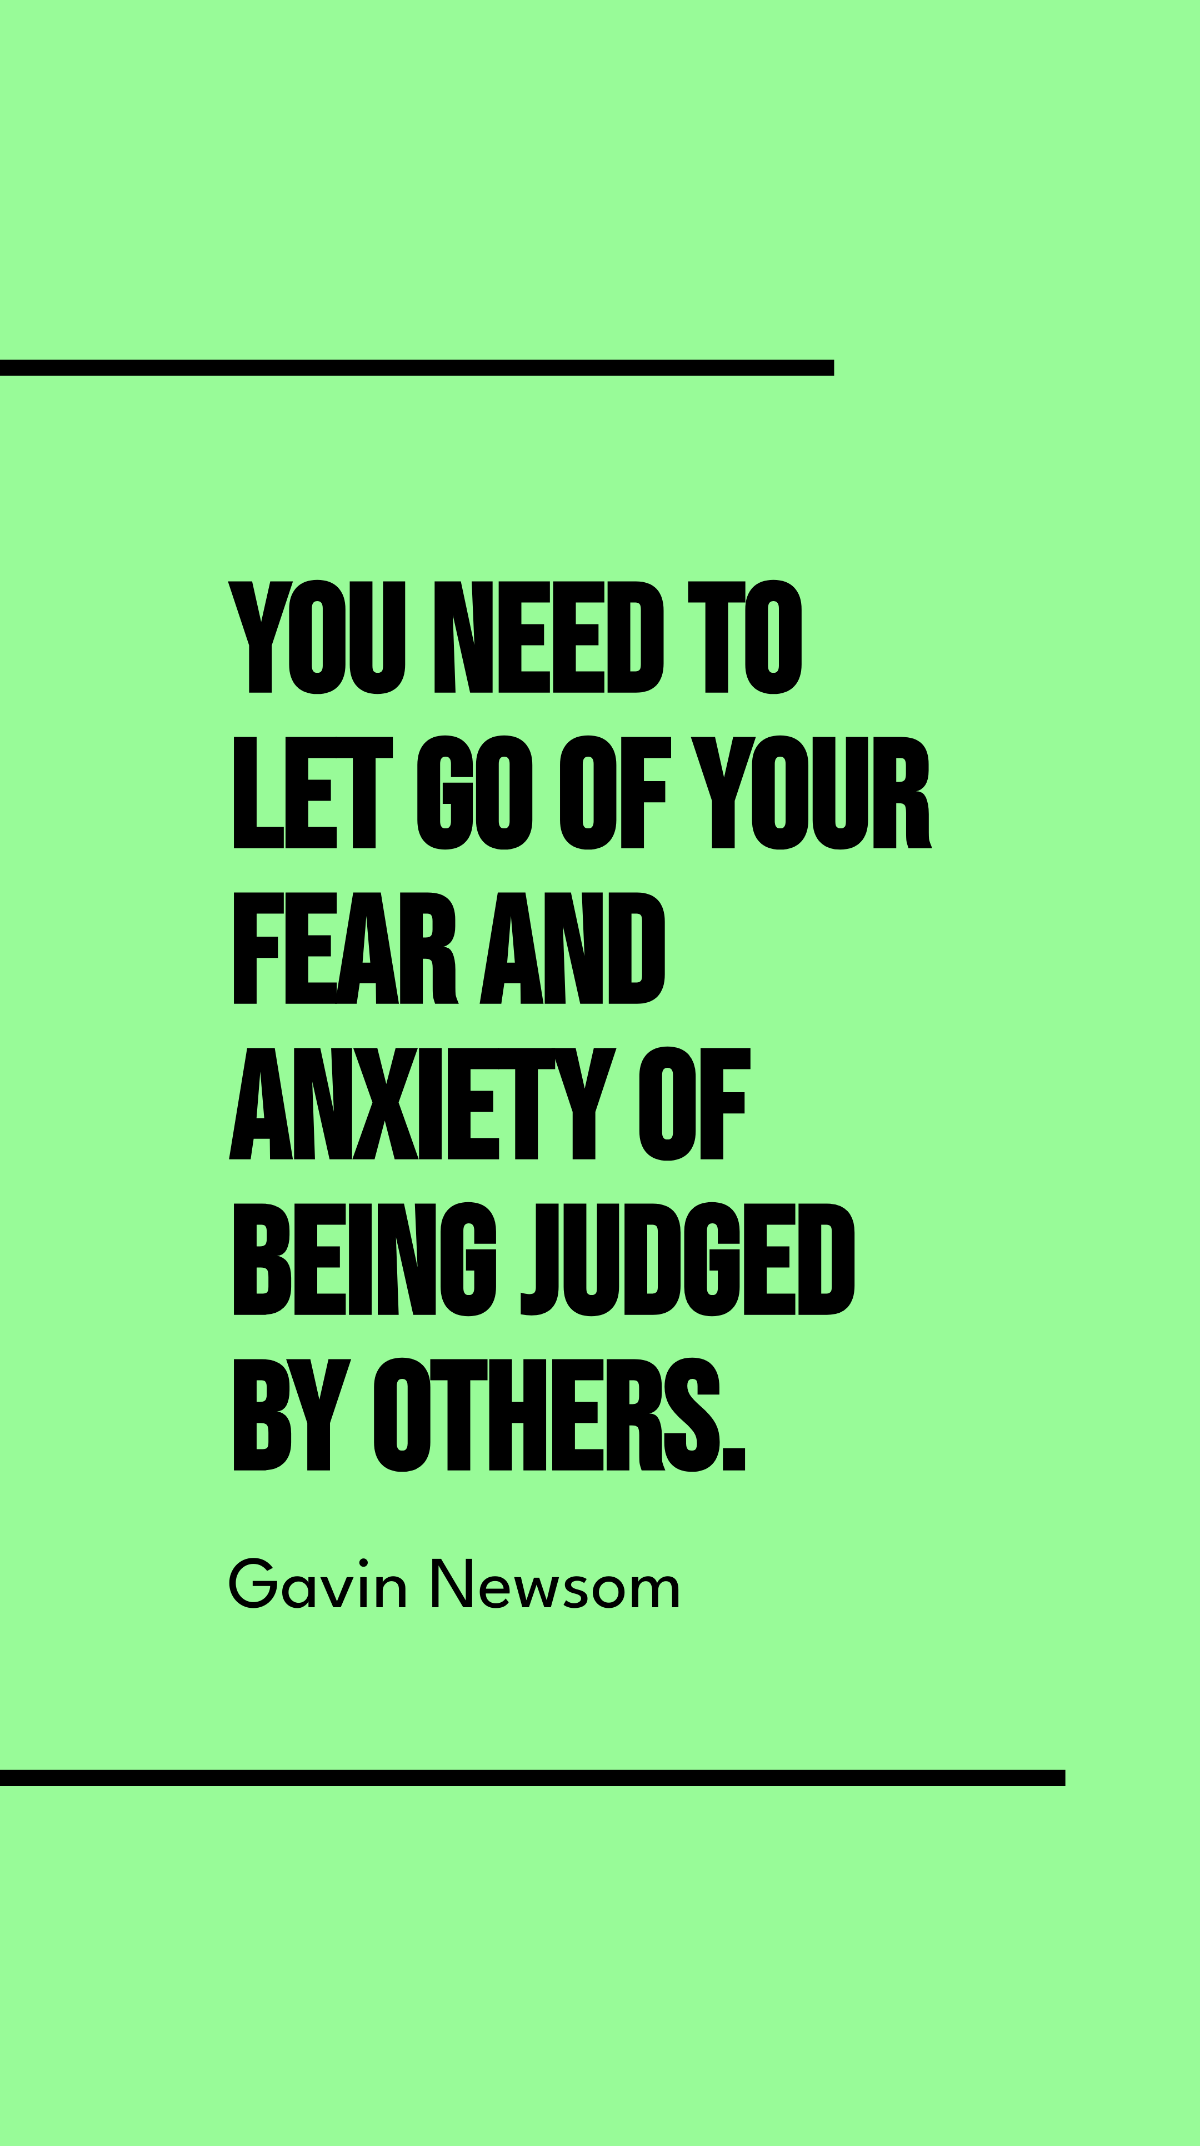 Free Gavin Newsom - You need to let go of your fear and anxiety of being judged by others. Template